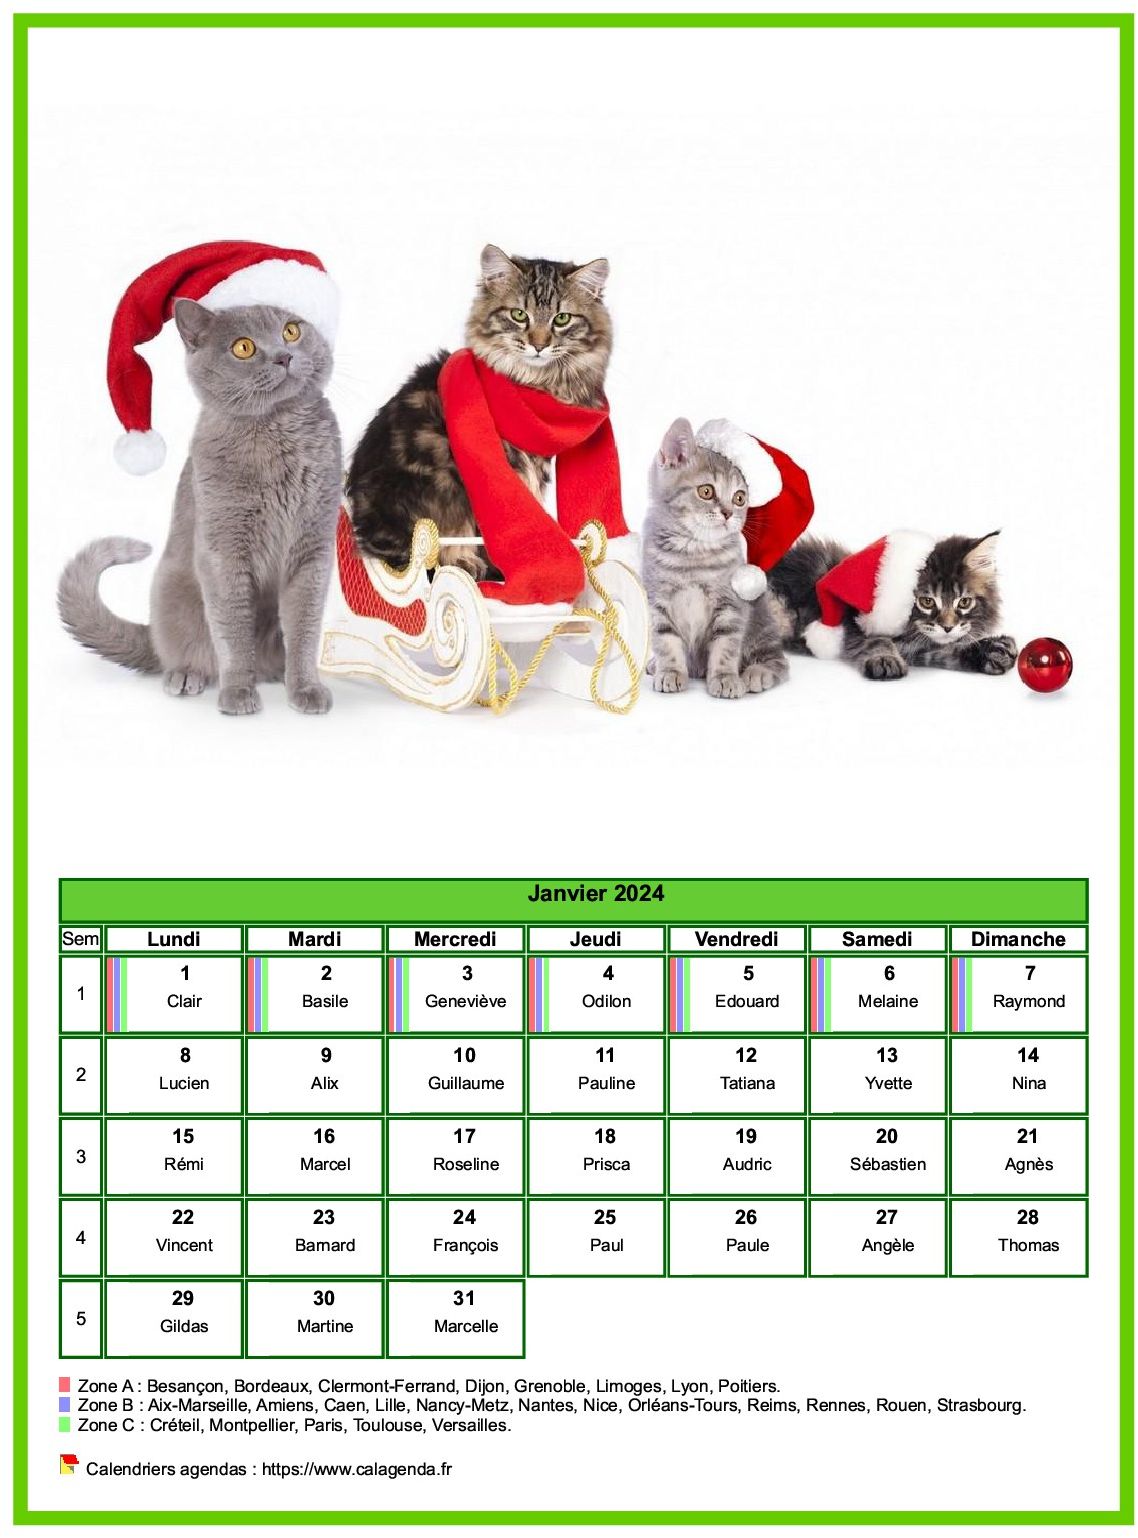 Calendrier janvier 2024 chats